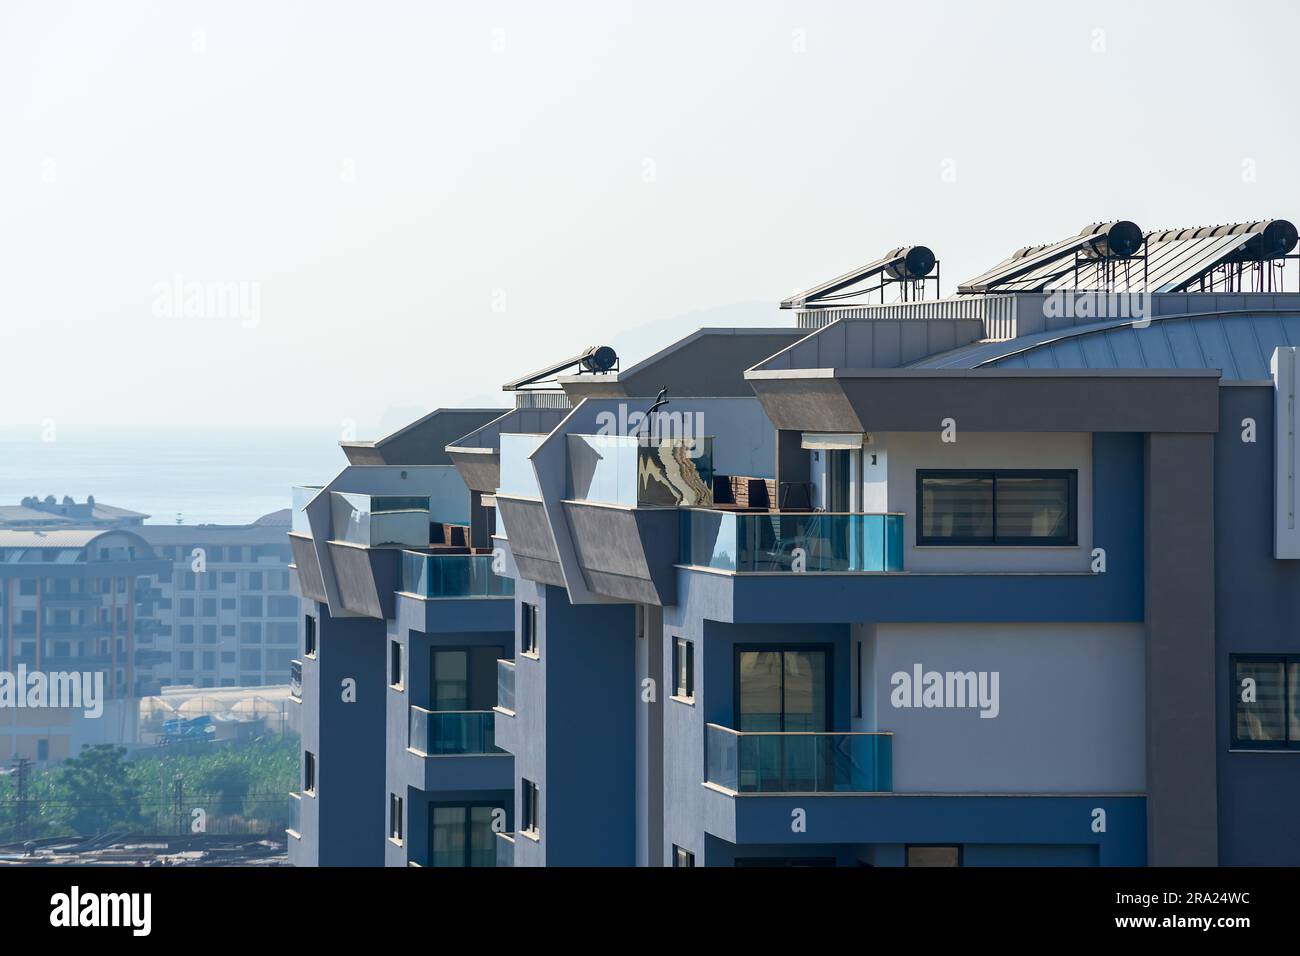 New modern apartment building. Details of modern urban architecture. A building with solar water heaters installed on the roof. Stock Photo